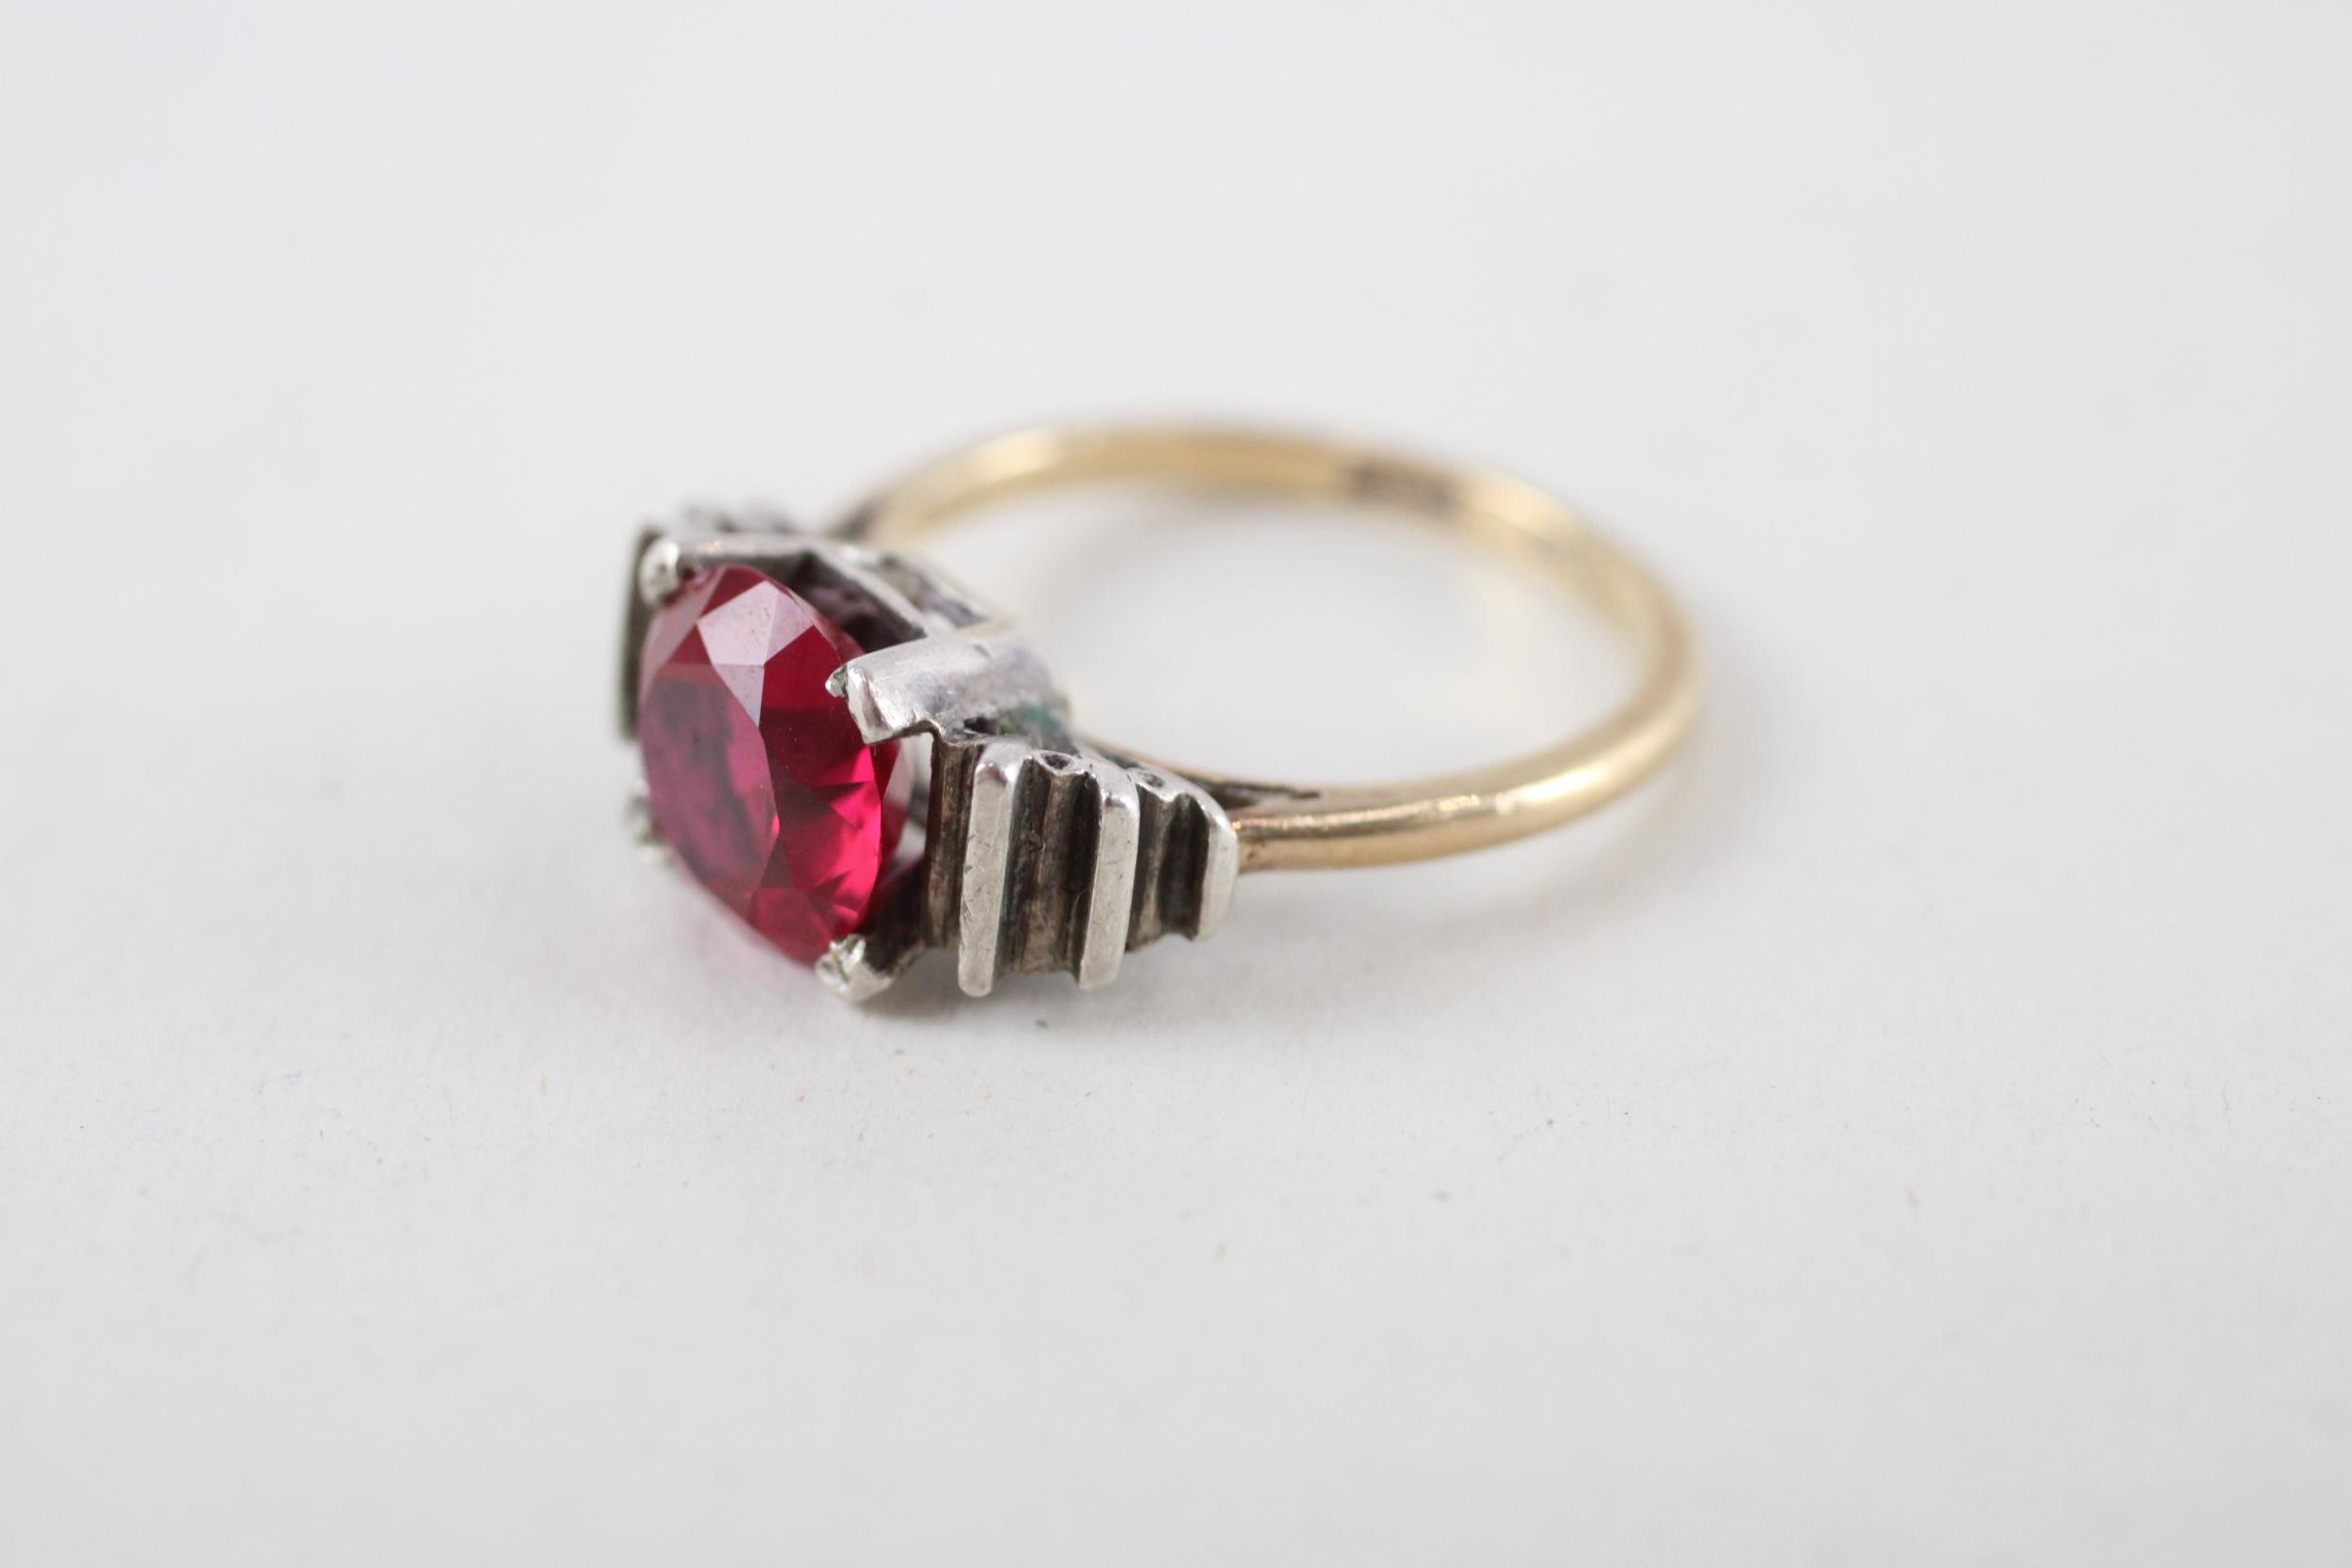 9ct gold & silver synthetic ruby single stone ring (3.8g) Size N 1/2 - Image 3 of 4